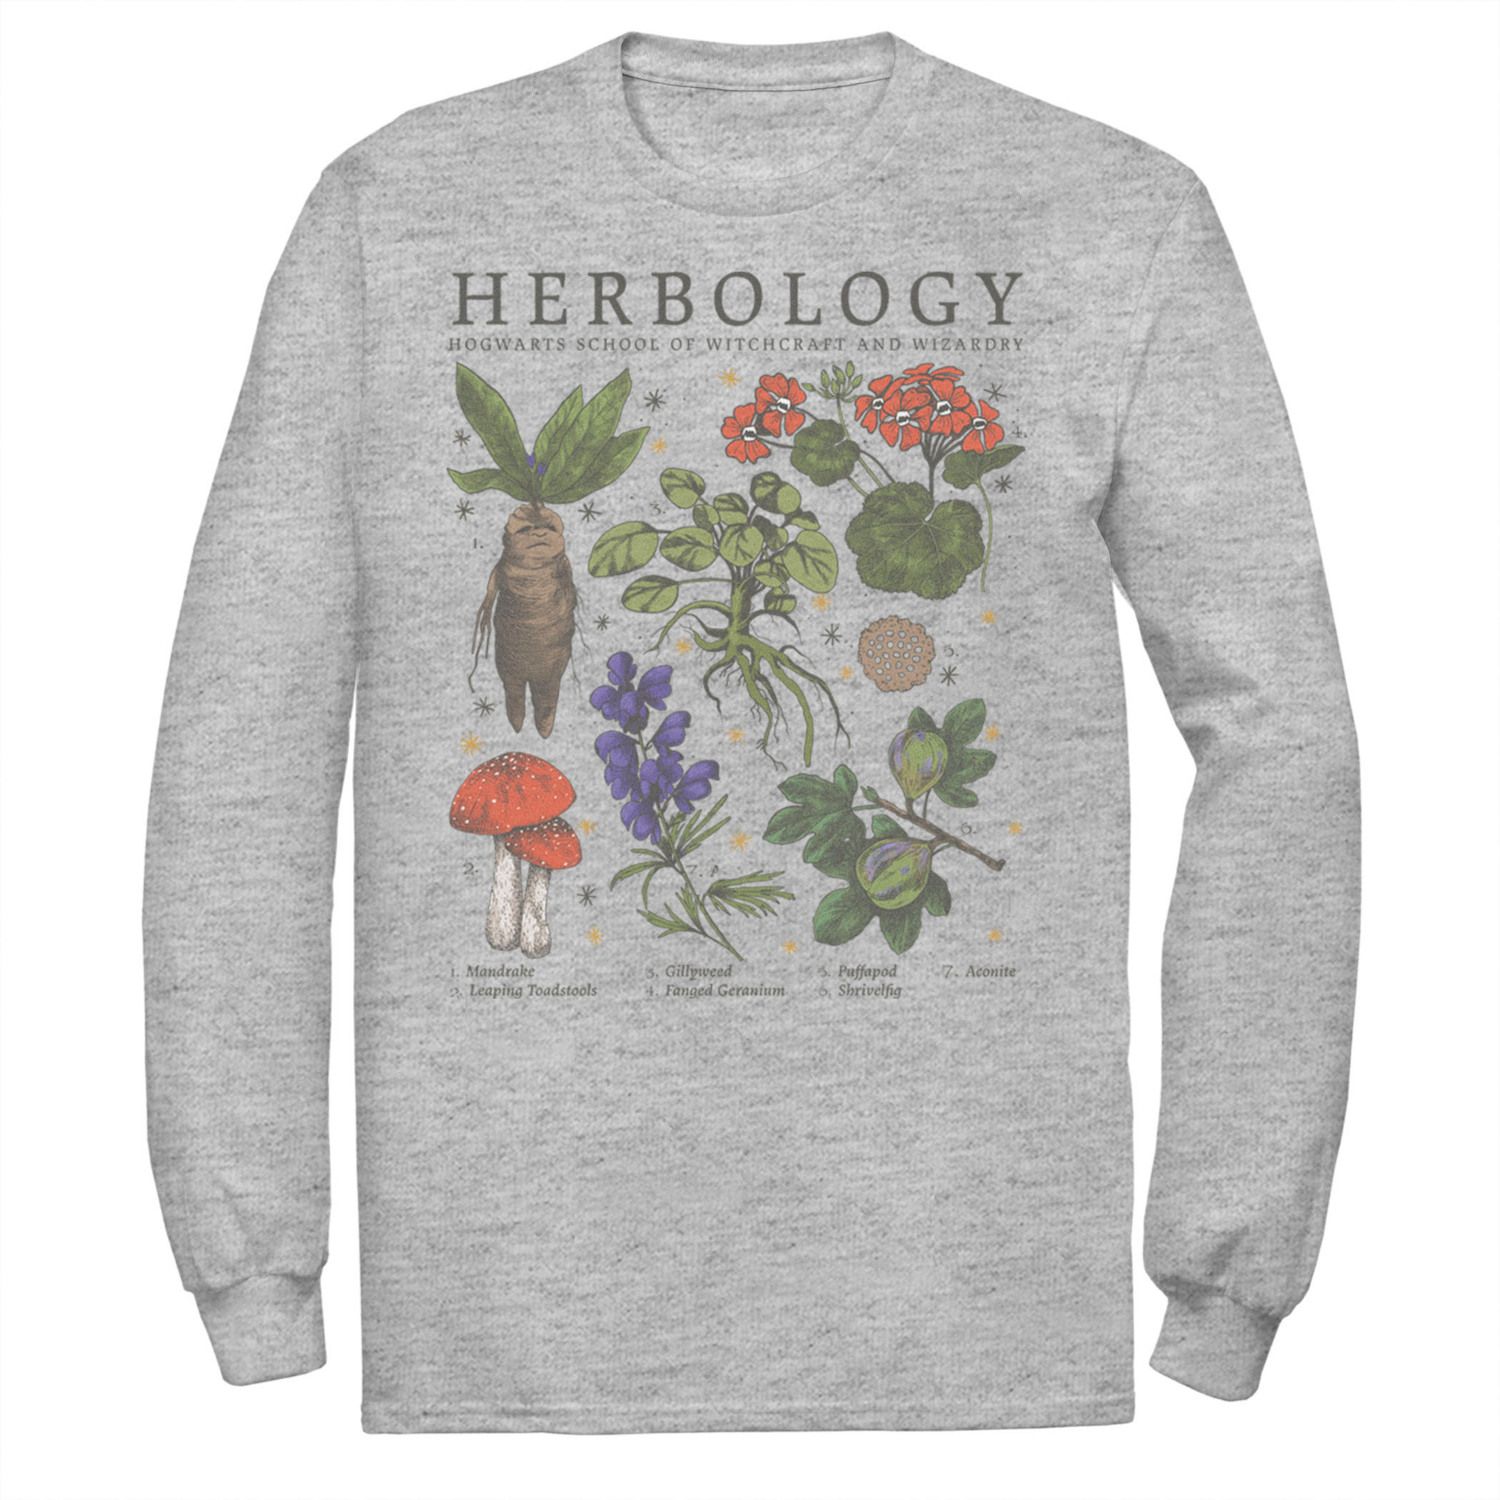 Image for Harry Potter Men's Deathly Hollows 2 Herbology Lineup Tee at Kohl's.